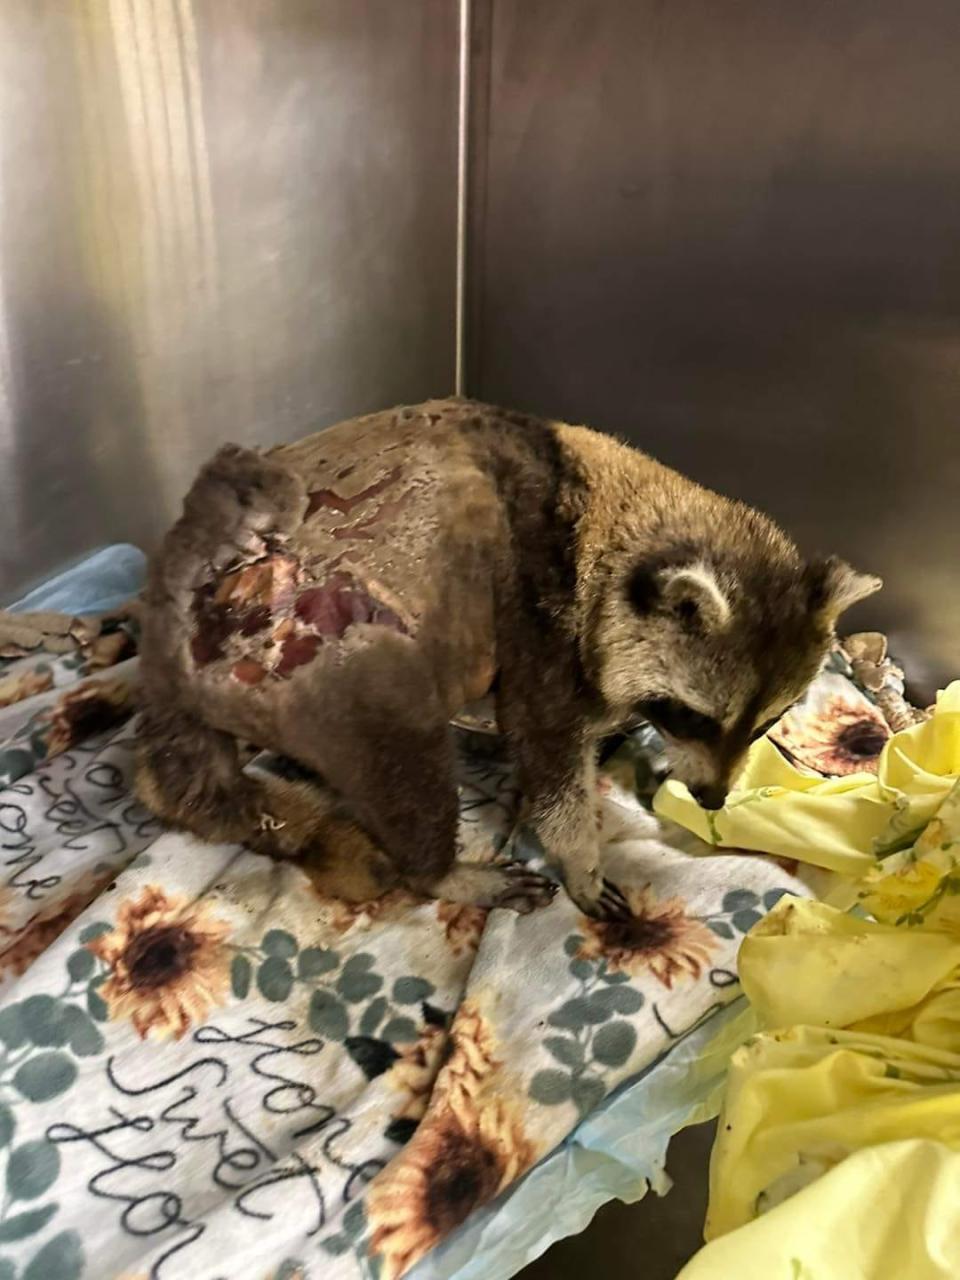 Andrew Chieu, of Quincy, will be arraigned on charges he set this raccoon on fire in his backyard. The raccoon died of her burns at the New England Wildlife Center in Weymouth.